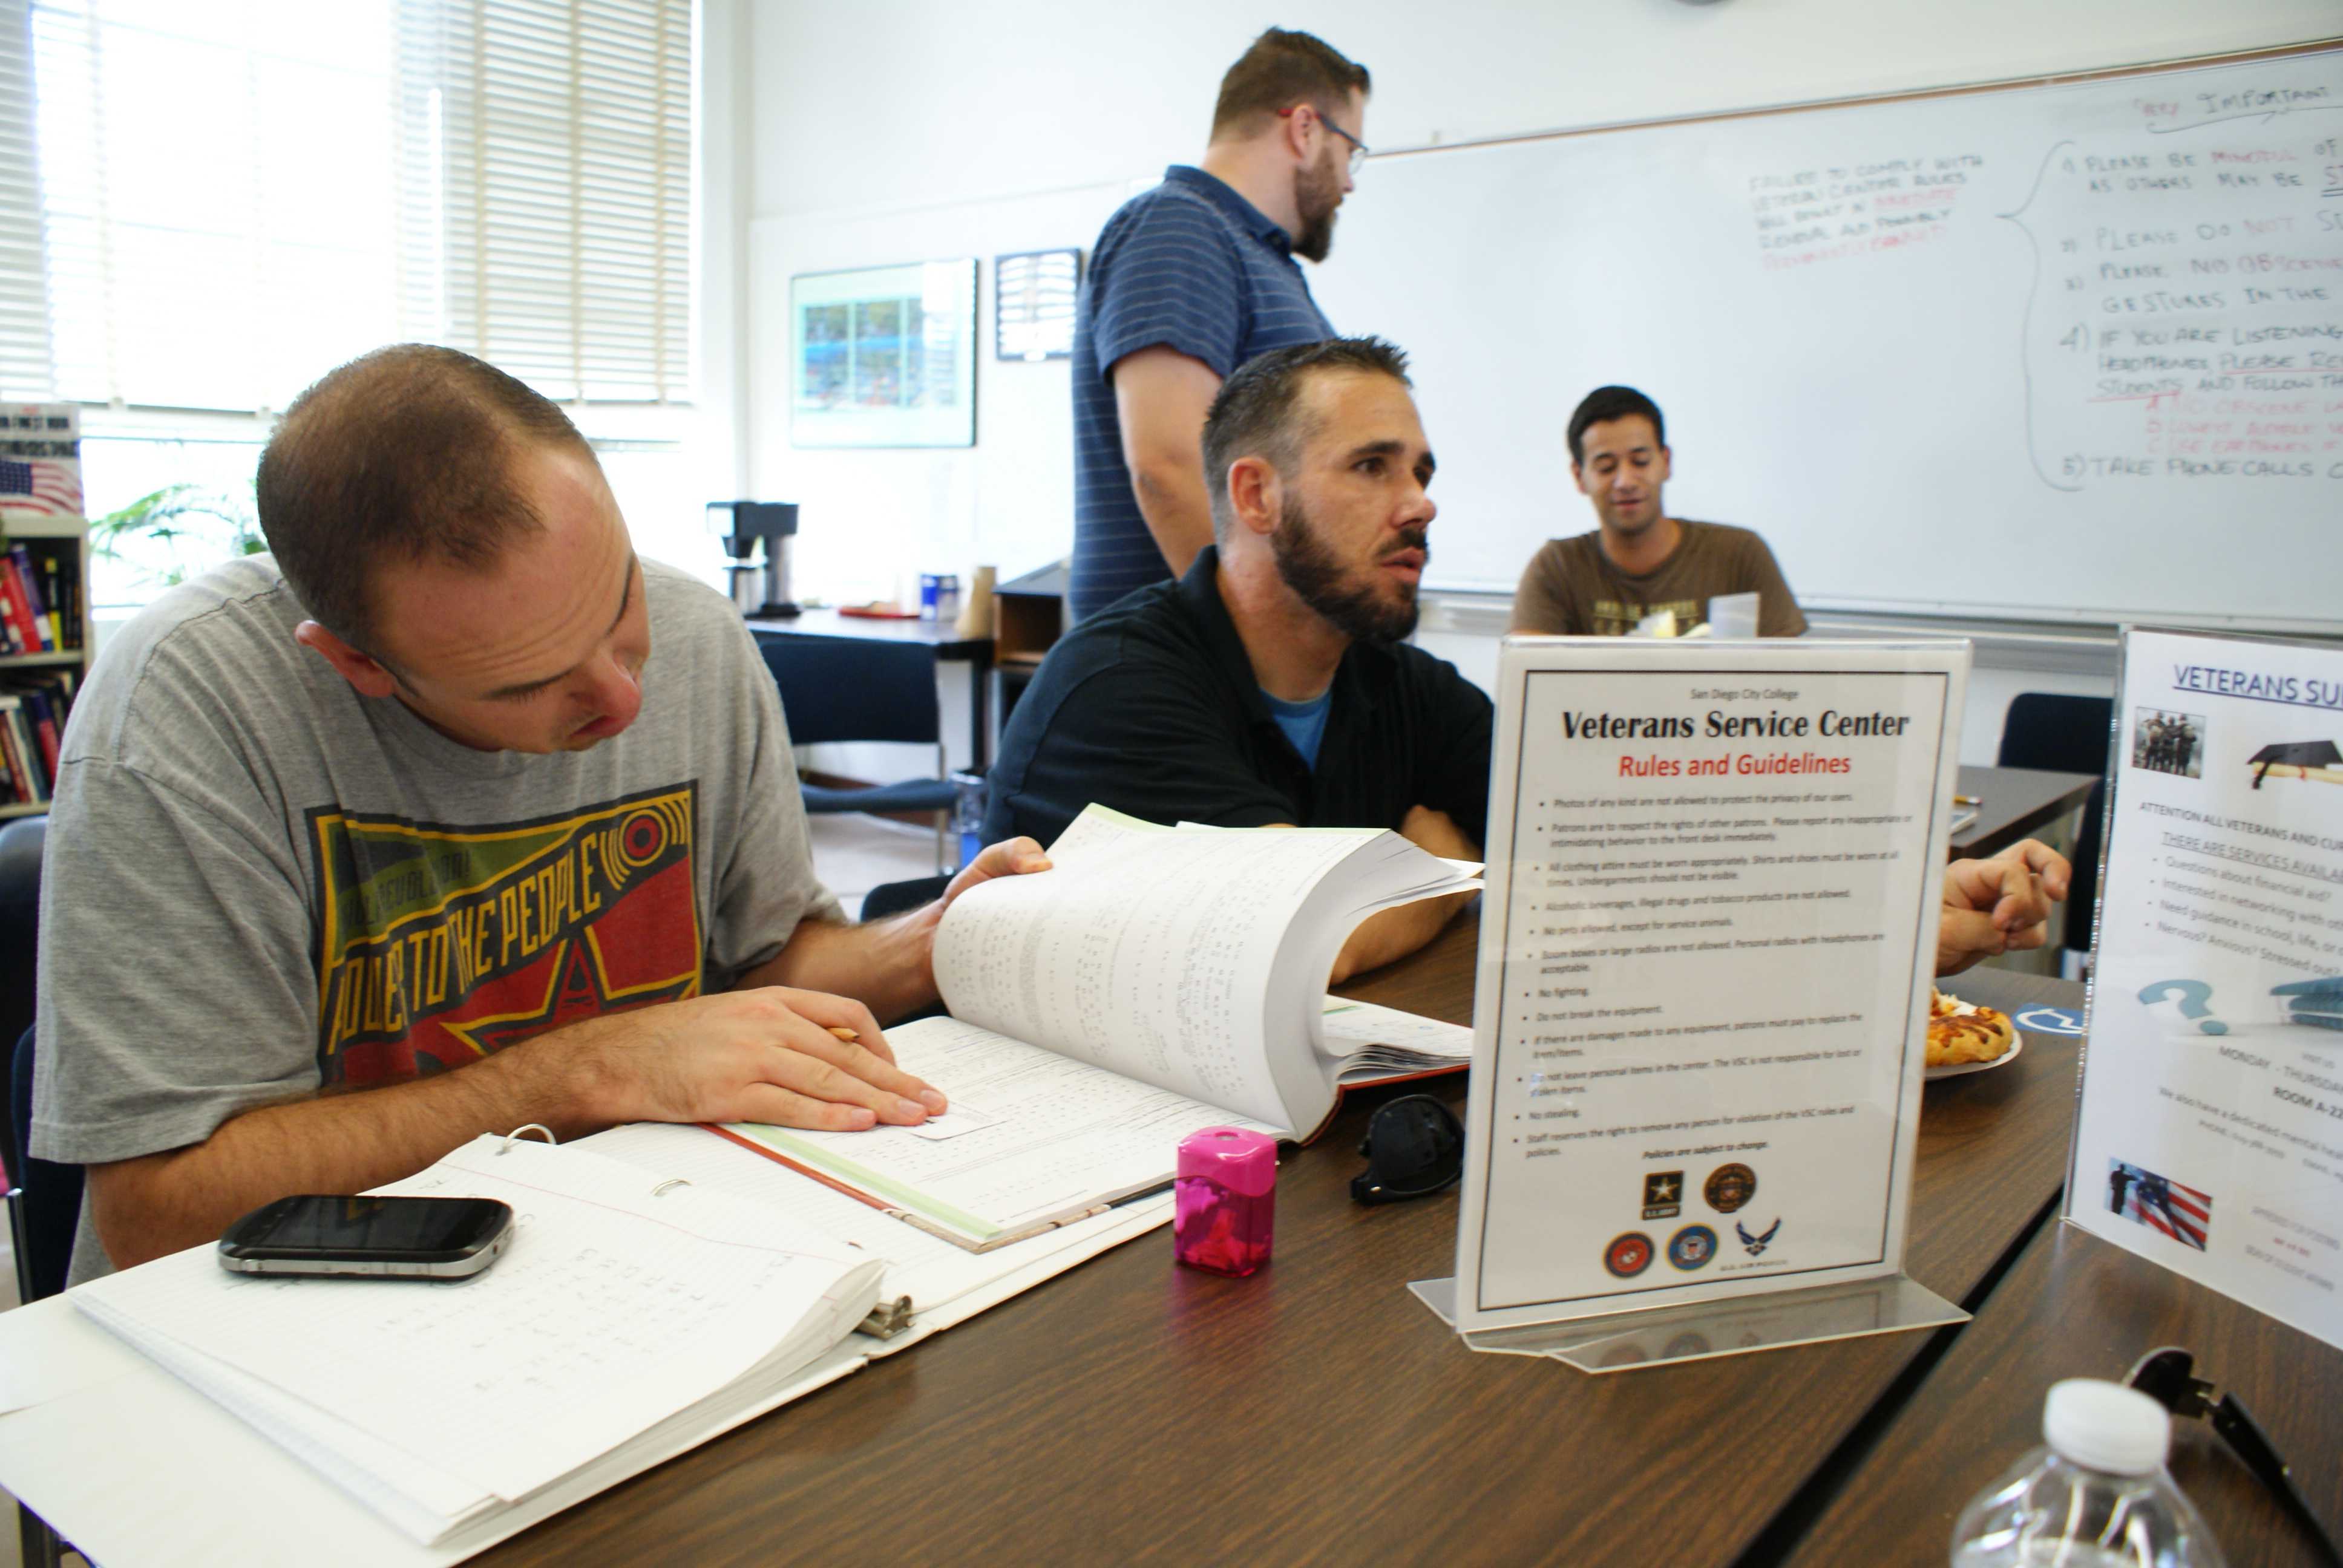 Peer counselors discuss some of the new services that will be available to student veterans this semester during a meeting at an open house event on Aug. 29. Torrey Spoerer, City Times.